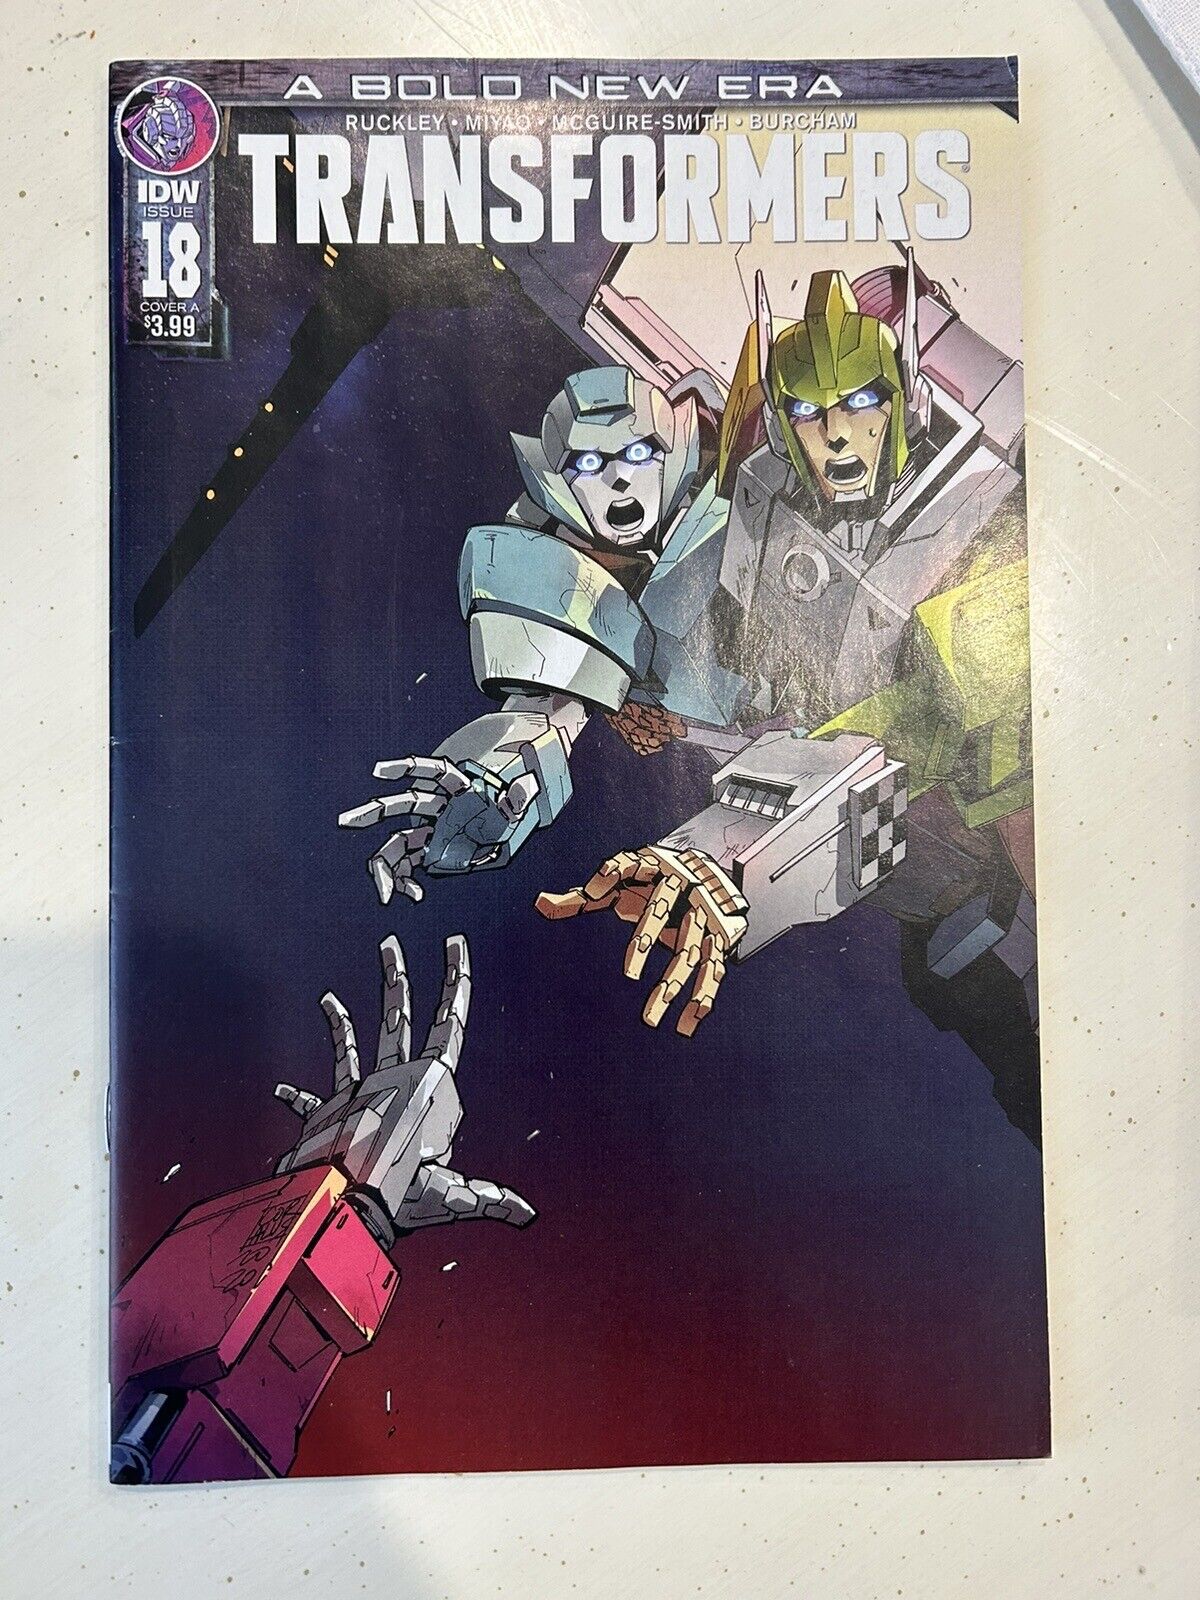 Transformers A Bold New Era Issue 18 IDW Comics Cover A